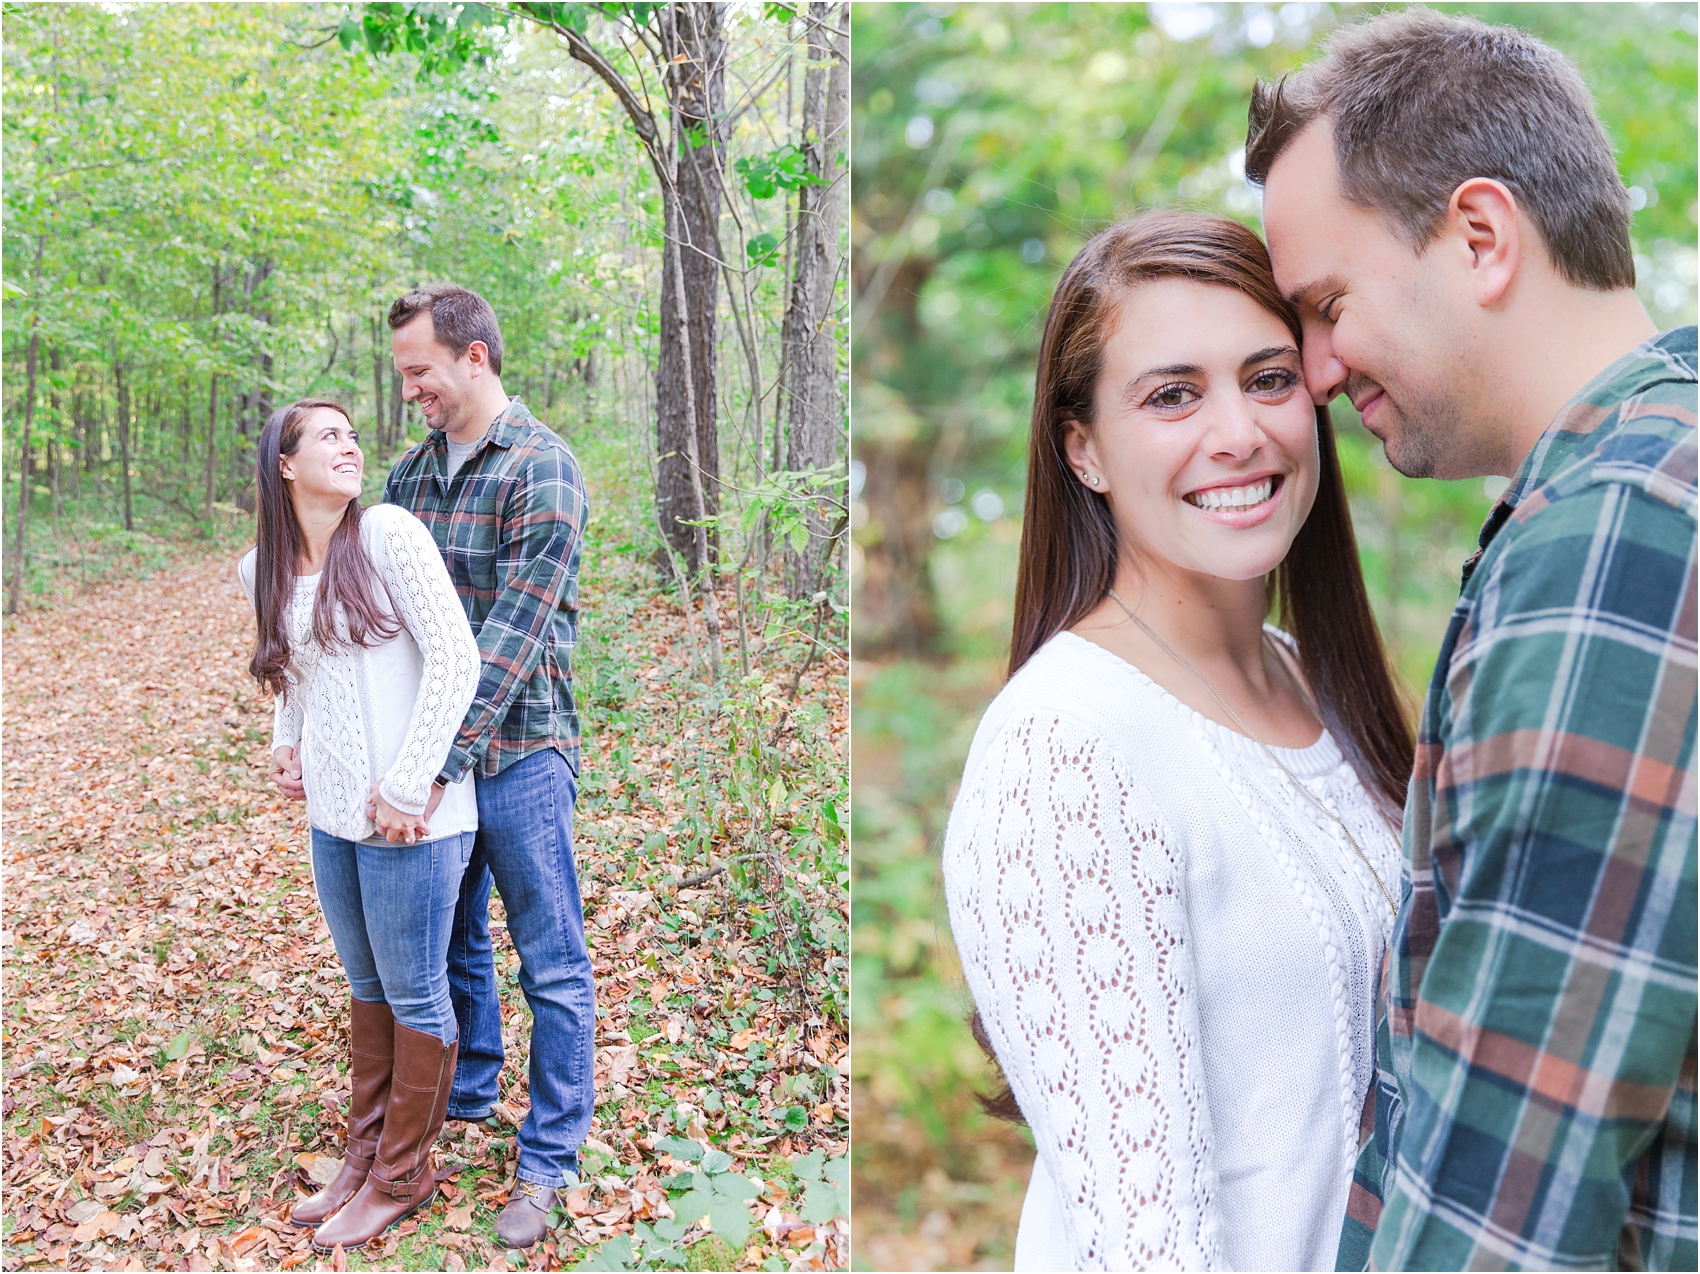 relaxed-autumn-engagement-photos-at-hudson-mills-metropark-in-dexter-mi-by-courtney-carolyn-photography_0010.jpg